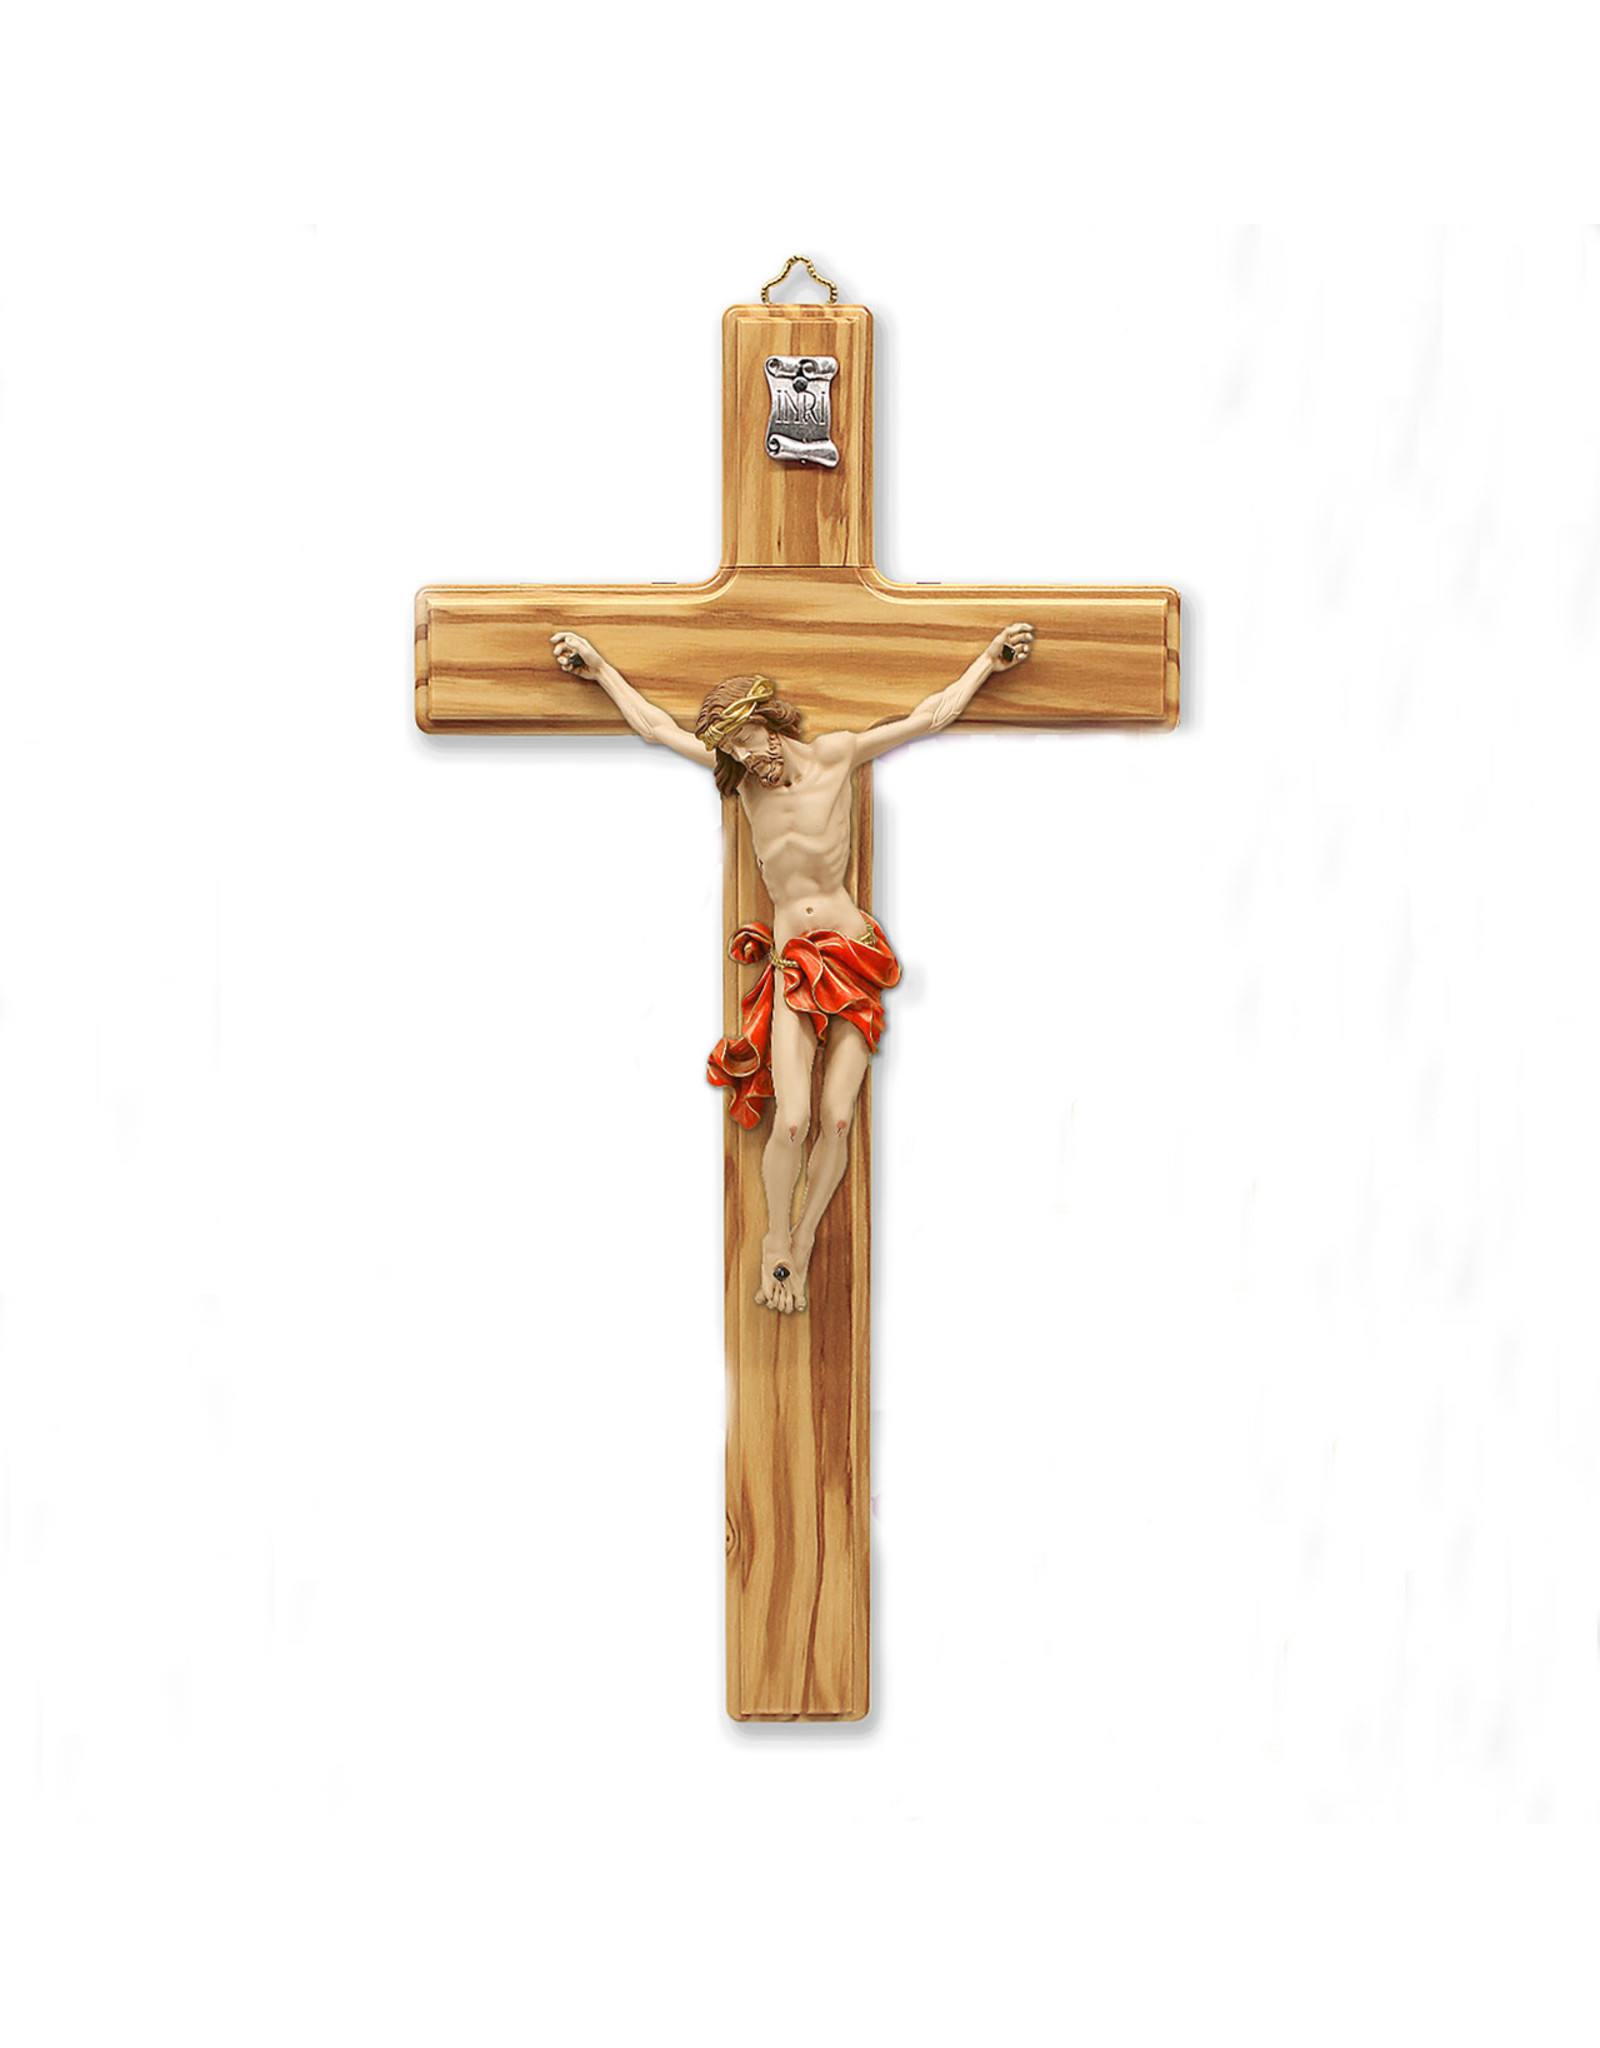 Tuscan Hills Crucifix - Olive Wood Cross with Red Painted Corpus (10-1/2" )